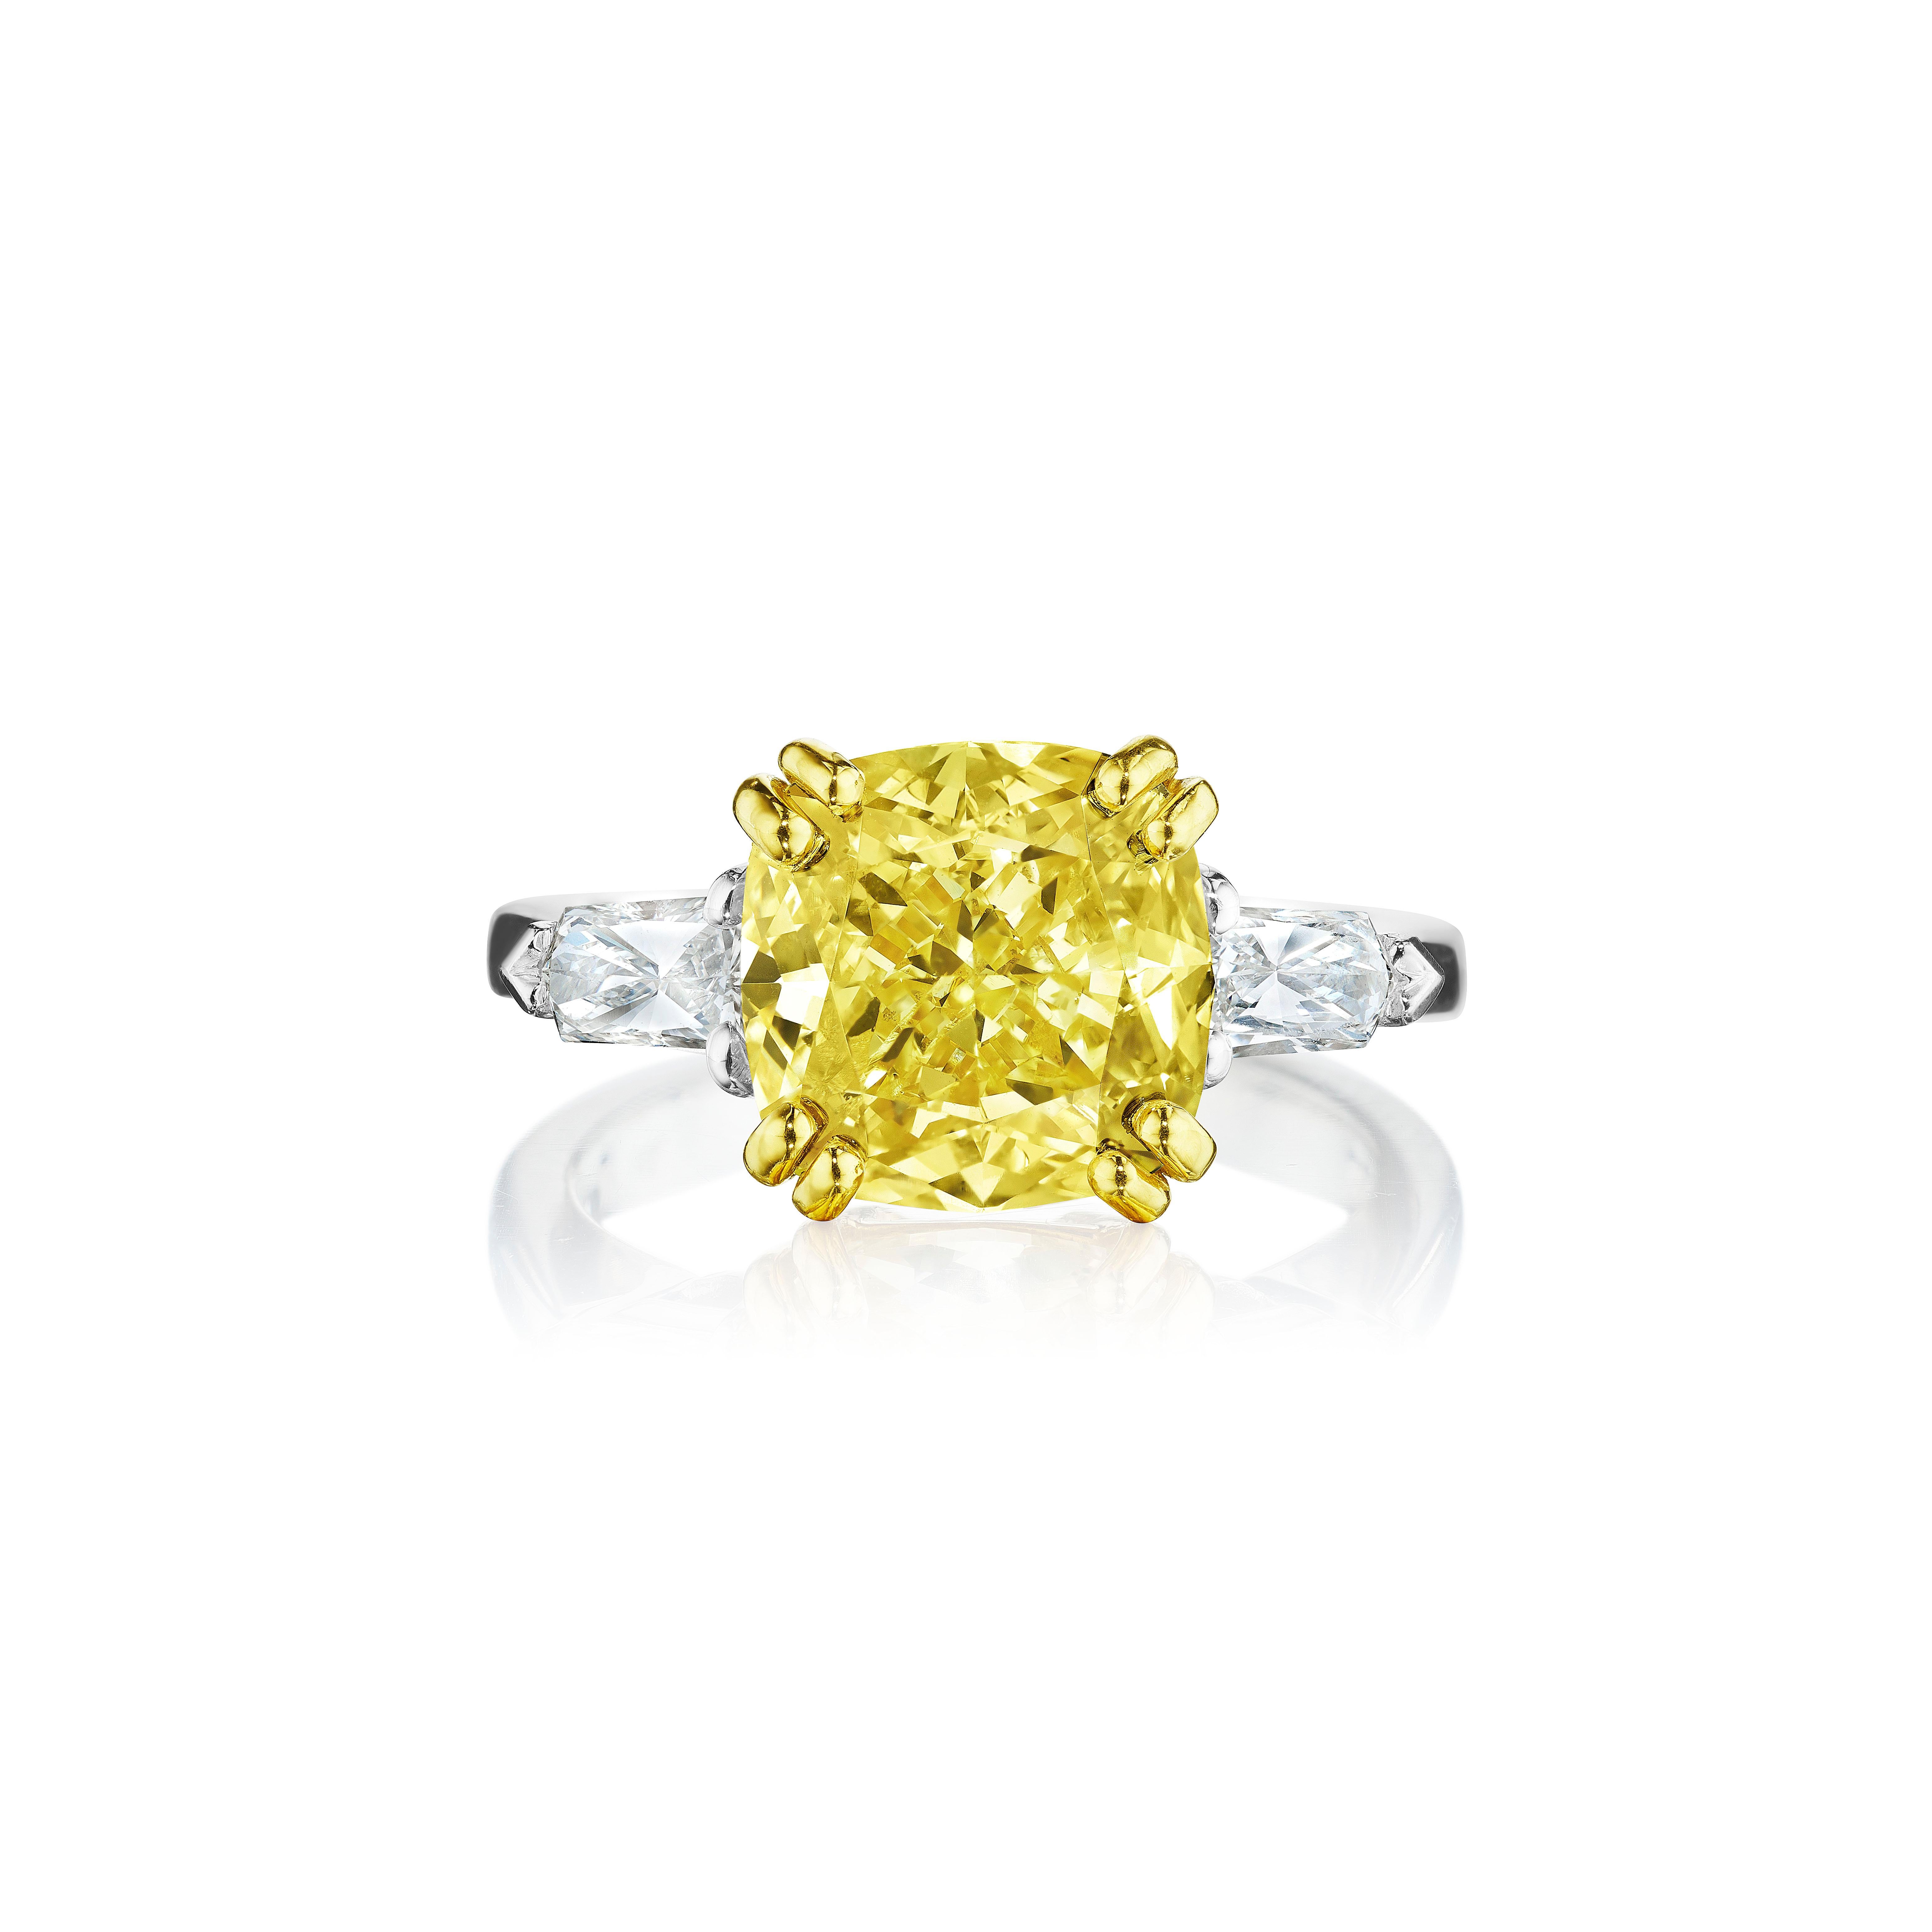 •	Gold: Platinum & 18KT Yellow
•	Size: 6.5
•	5.85 Carats

•	Number of Cushion Diamonds: 1
•	Carat Weight: 5.01ctw
•	Color: Fancy Brownish Yellow
•	Clarity: I1
•	GIA: 6214246644

•	Number of Bullet Cut Diamonds: 2
•	Carat Weight: 0.57ctw
•	Color: